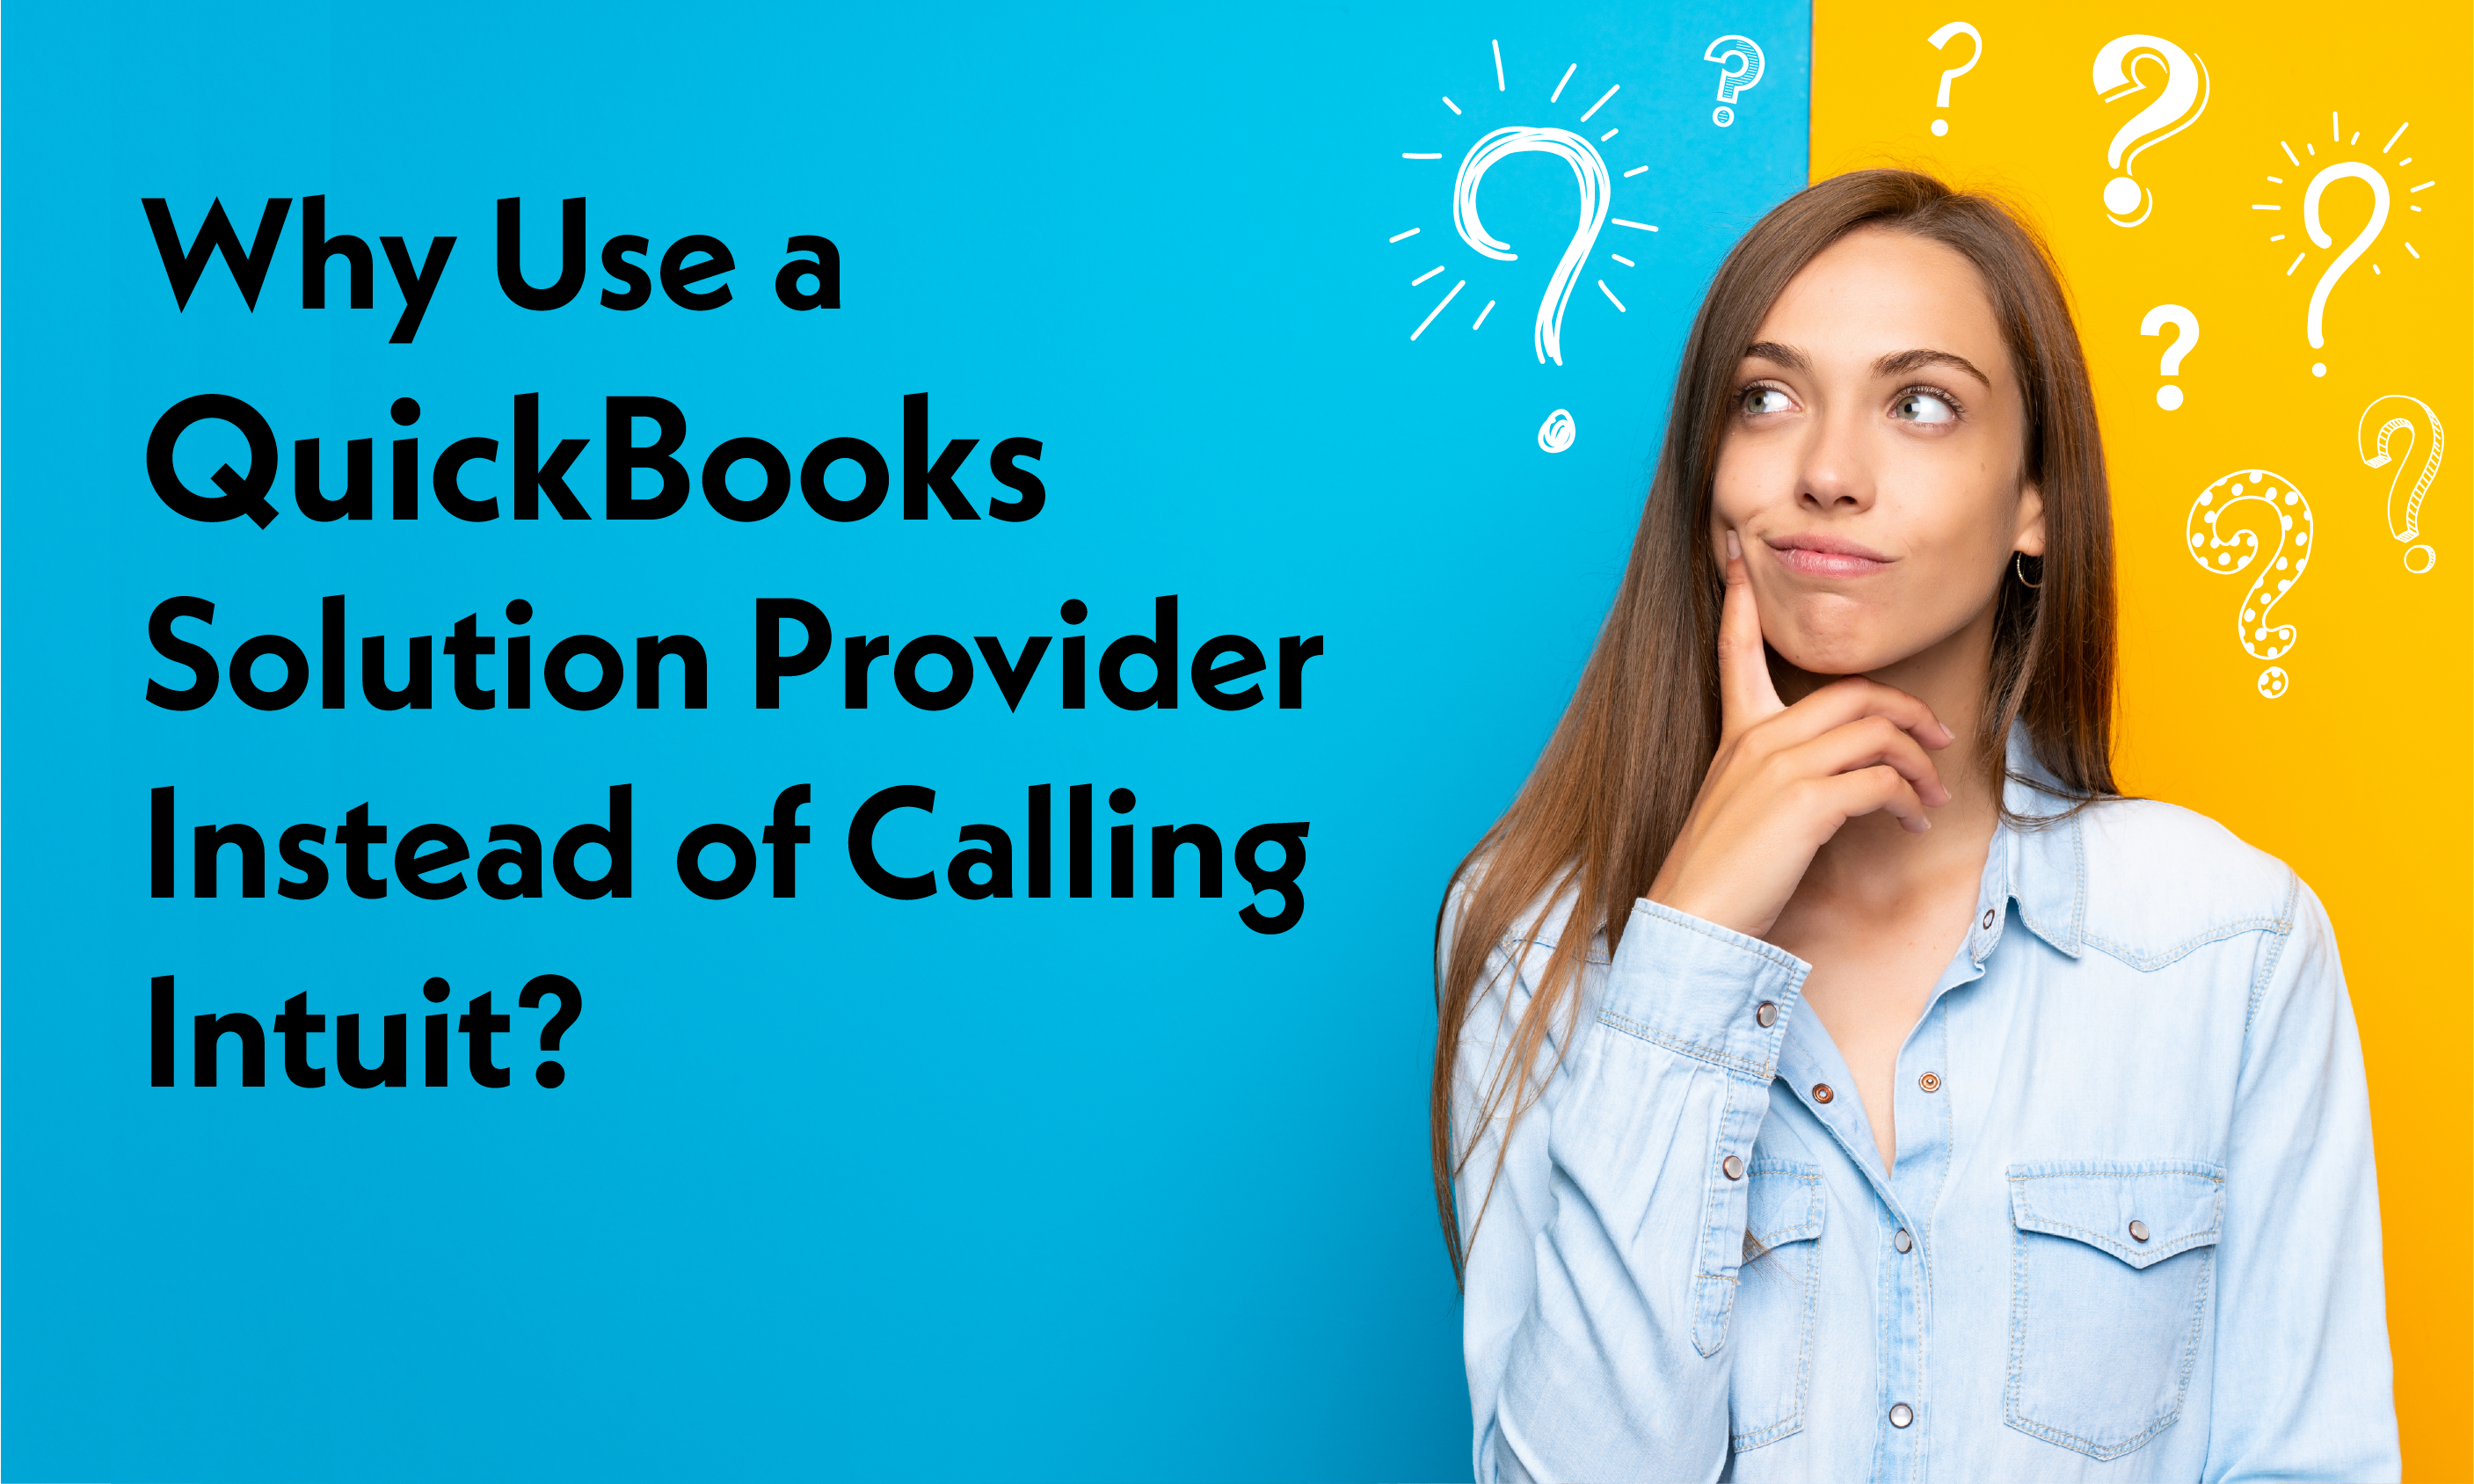 Why Use a QuickBooks Solution Provider